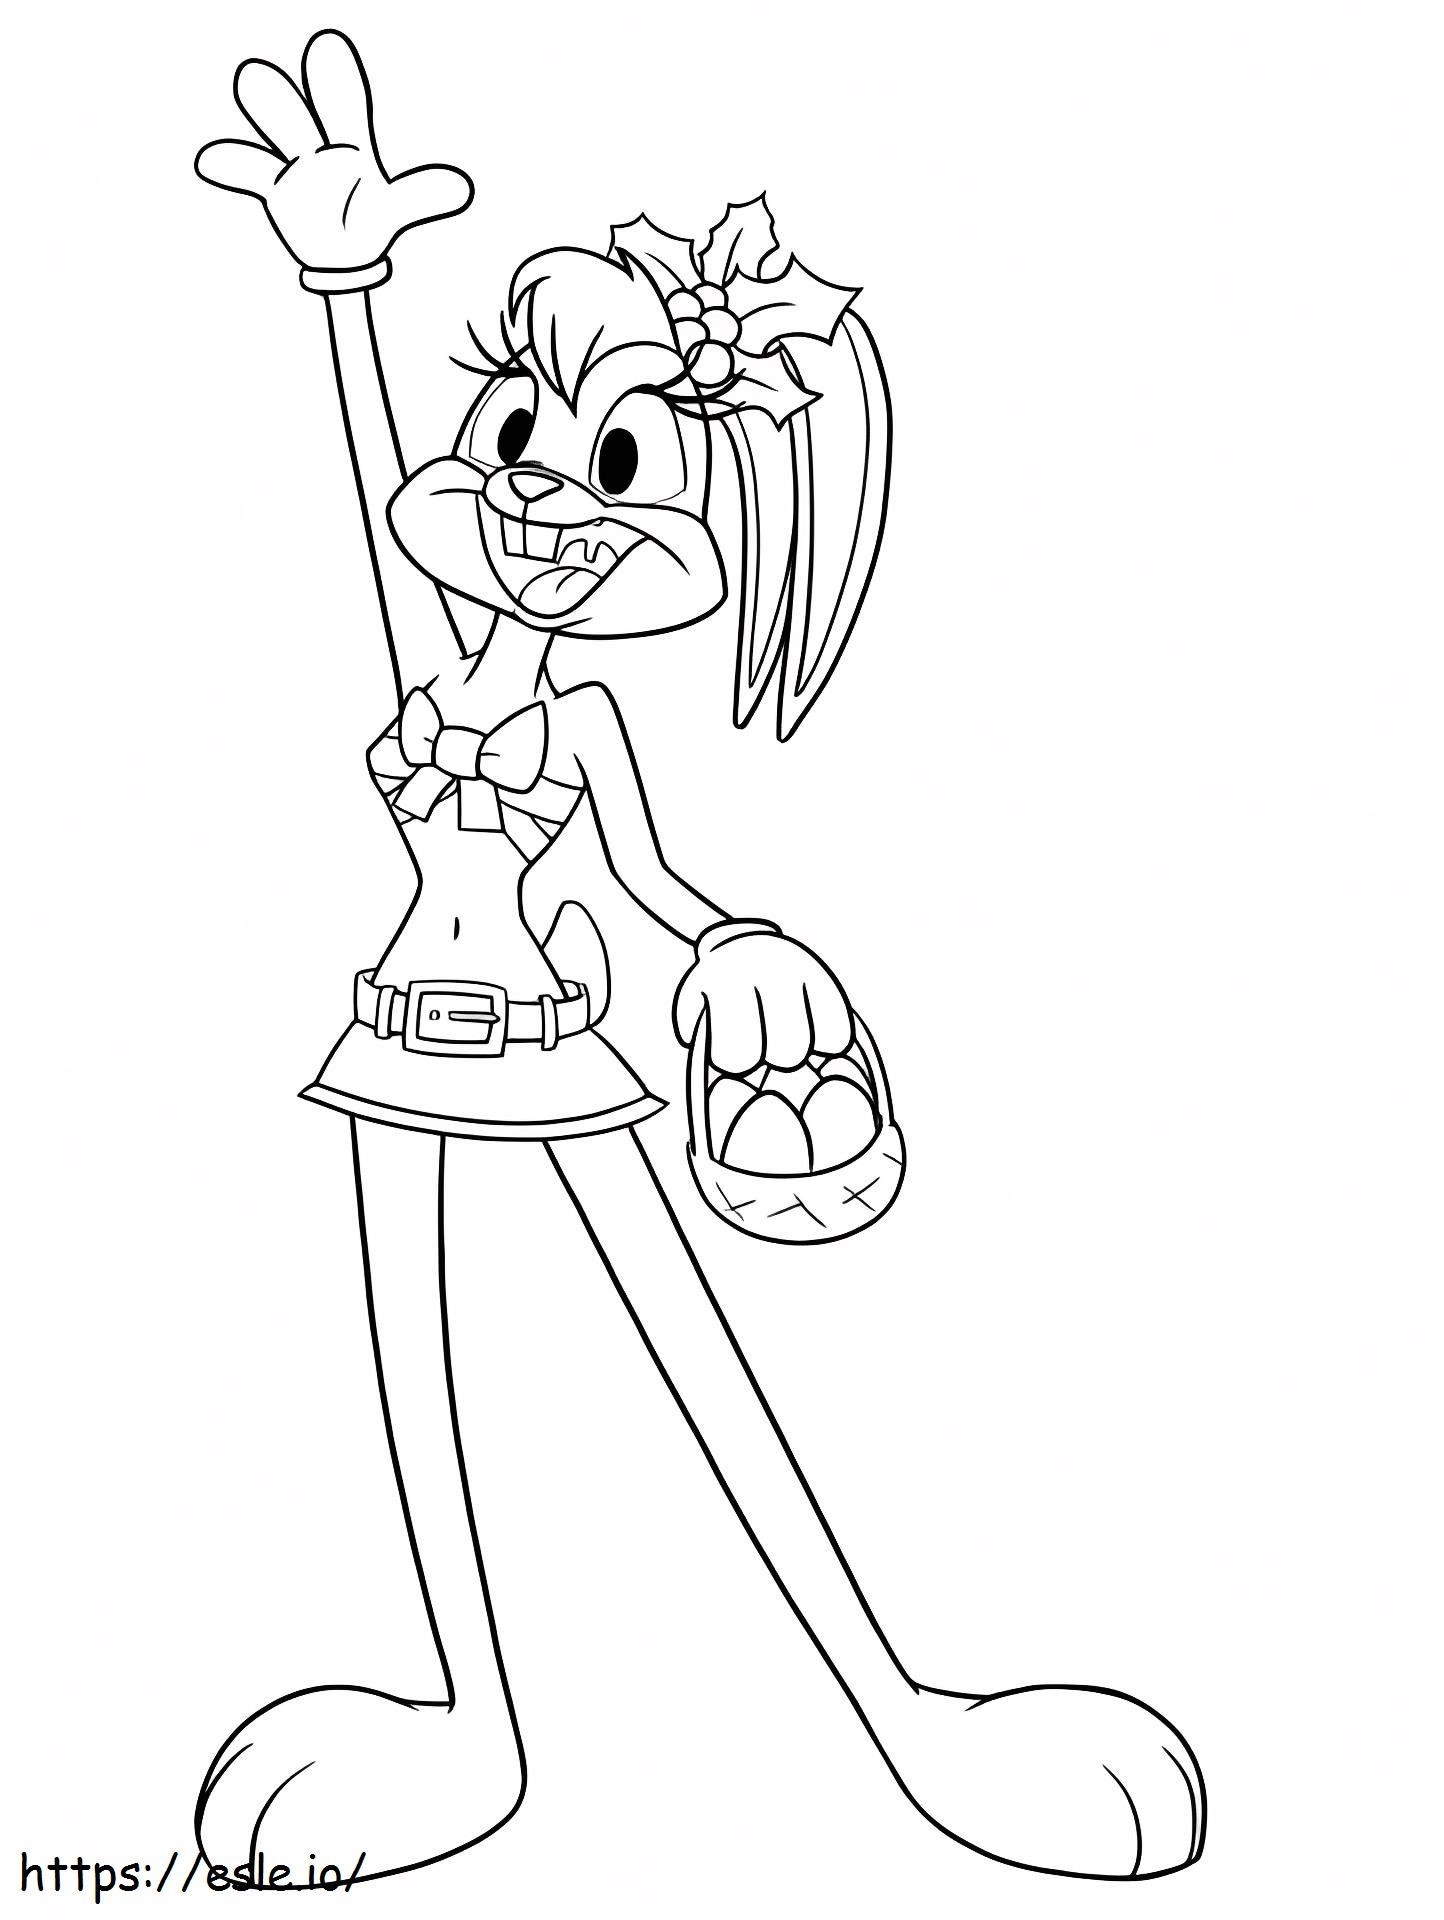 1533094172 Lola Says Hello A4 coloring page